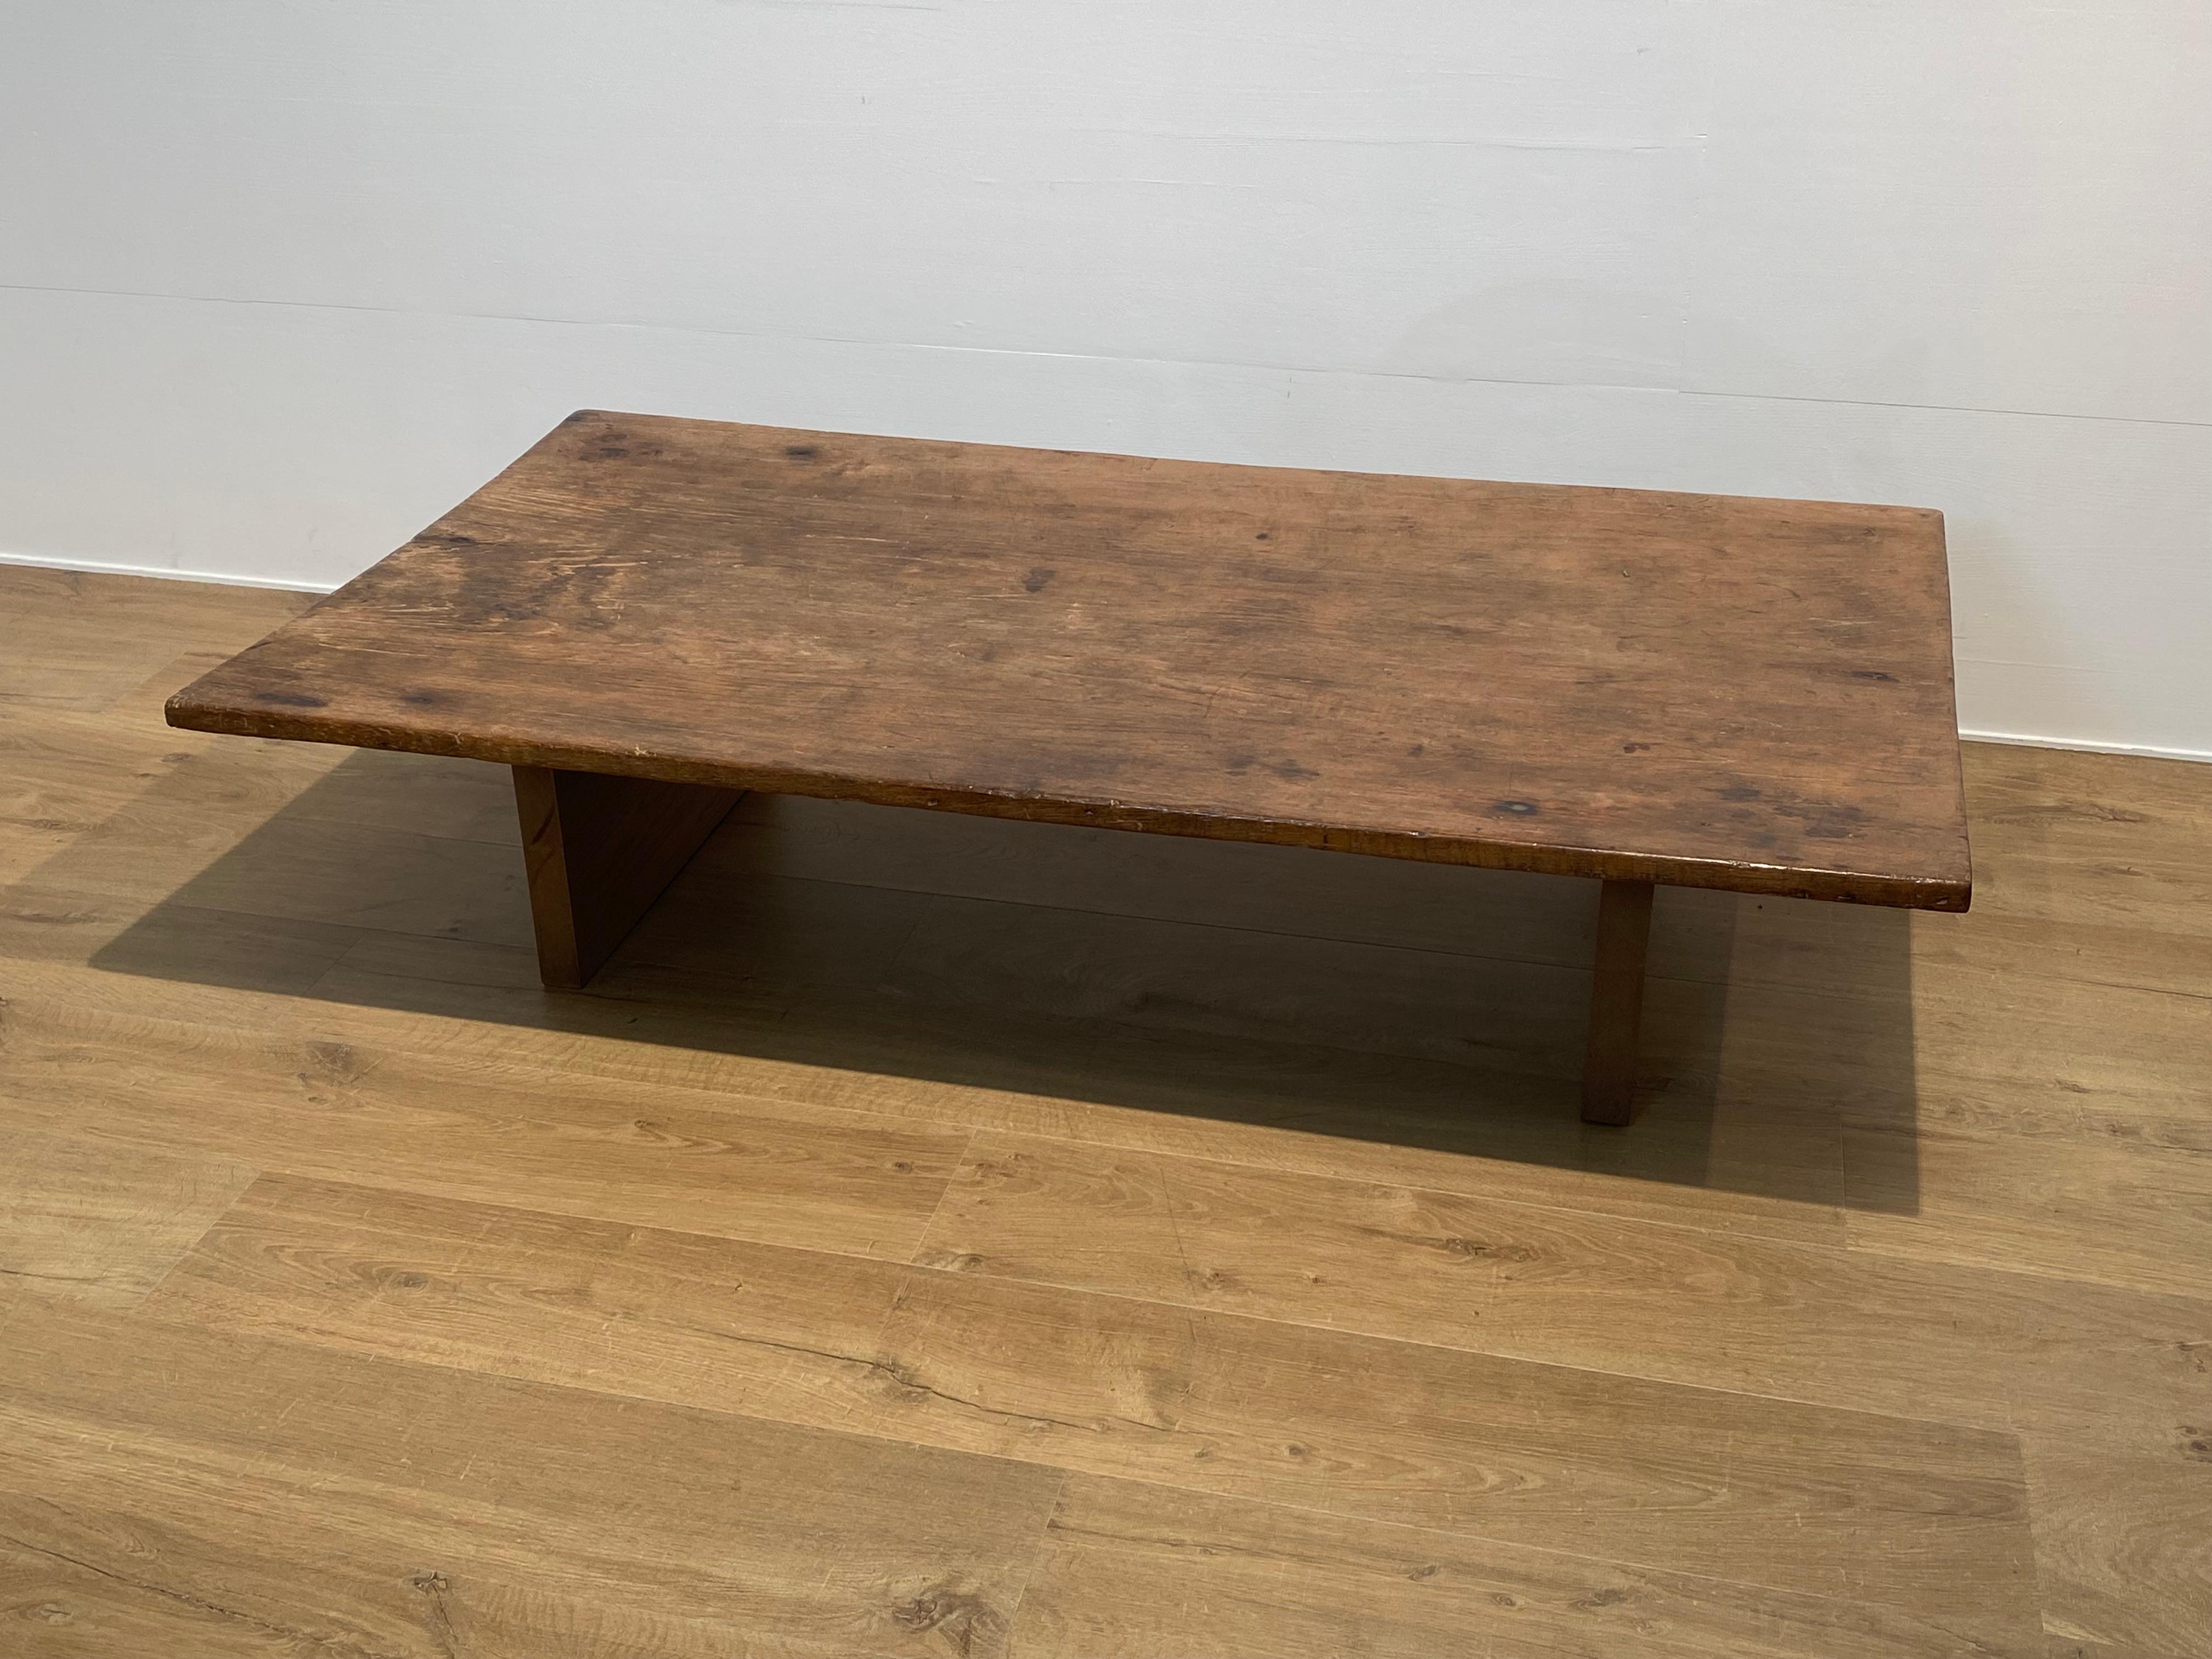 Brutalist Wooden Sofa Table,
made of an antique Teak wooden top from South East Asia, Thailand,
the base is a modern wooden structure,
the top is made of one piece wood and has a great patina and warm shine of the wood,
the top has a very light bow